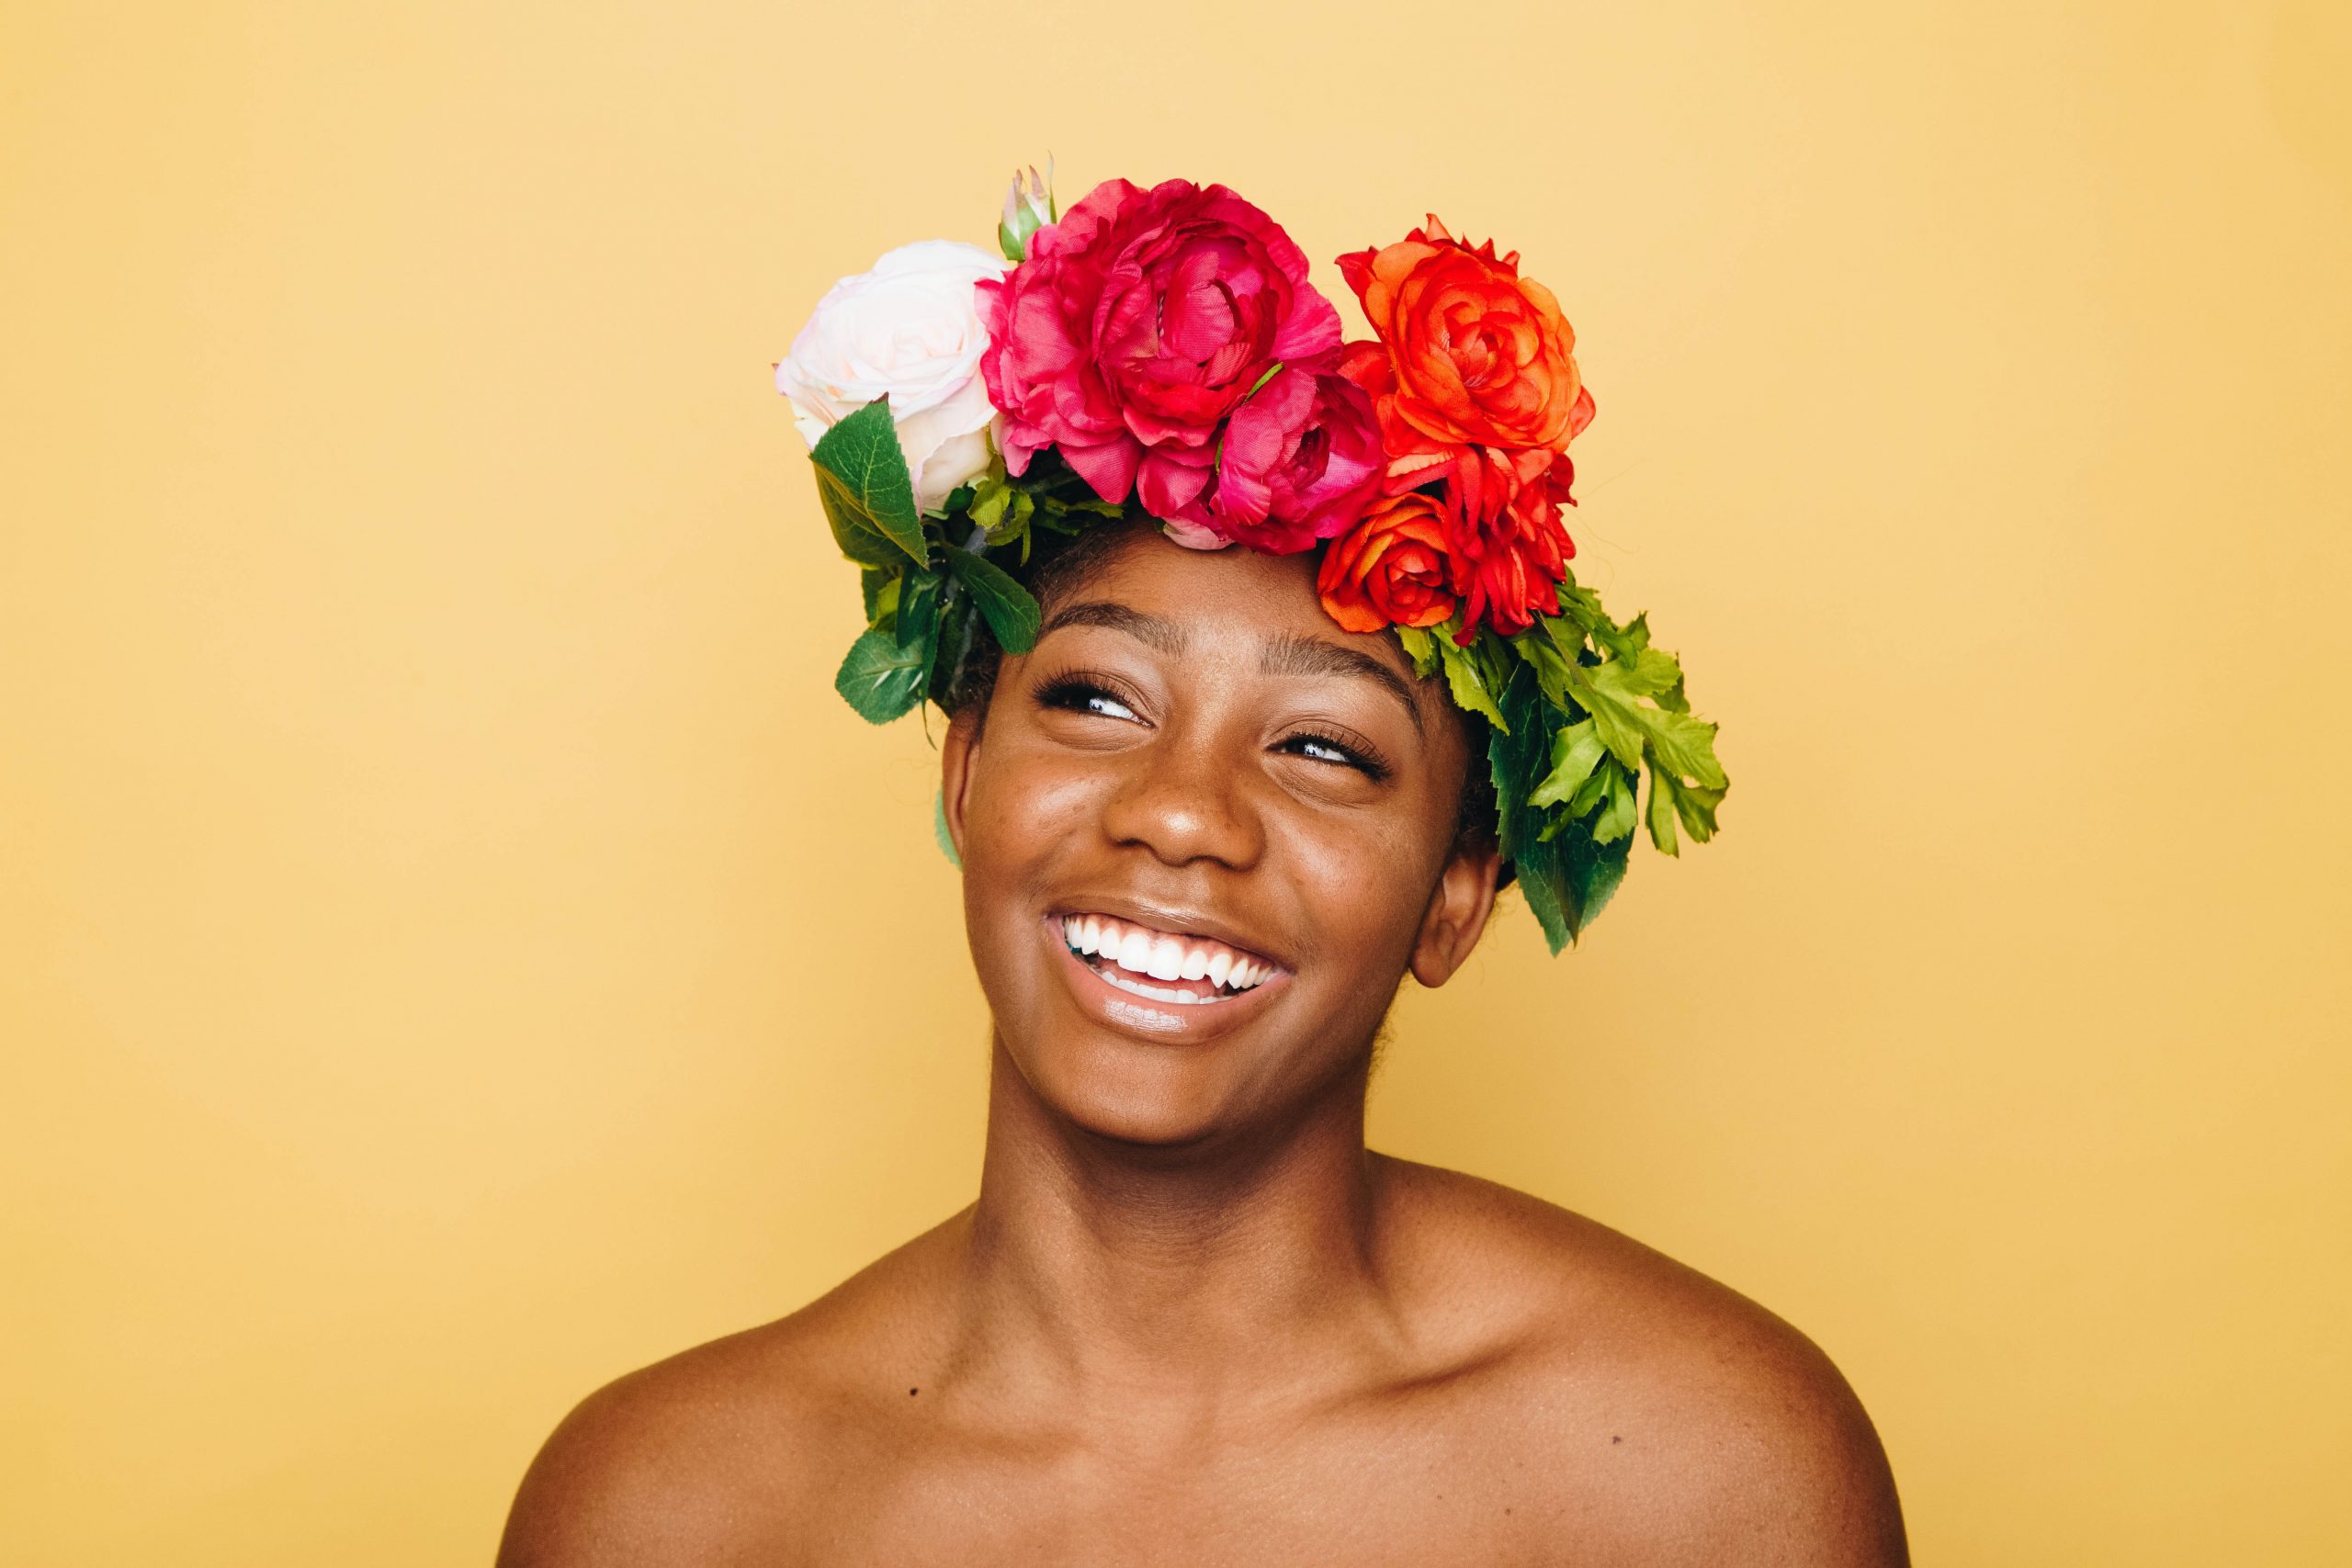 Black-Owned Hair Products: A Look at 2 Black Founders Blazing the Trail and Creating Highly Rated Natural Hair Products